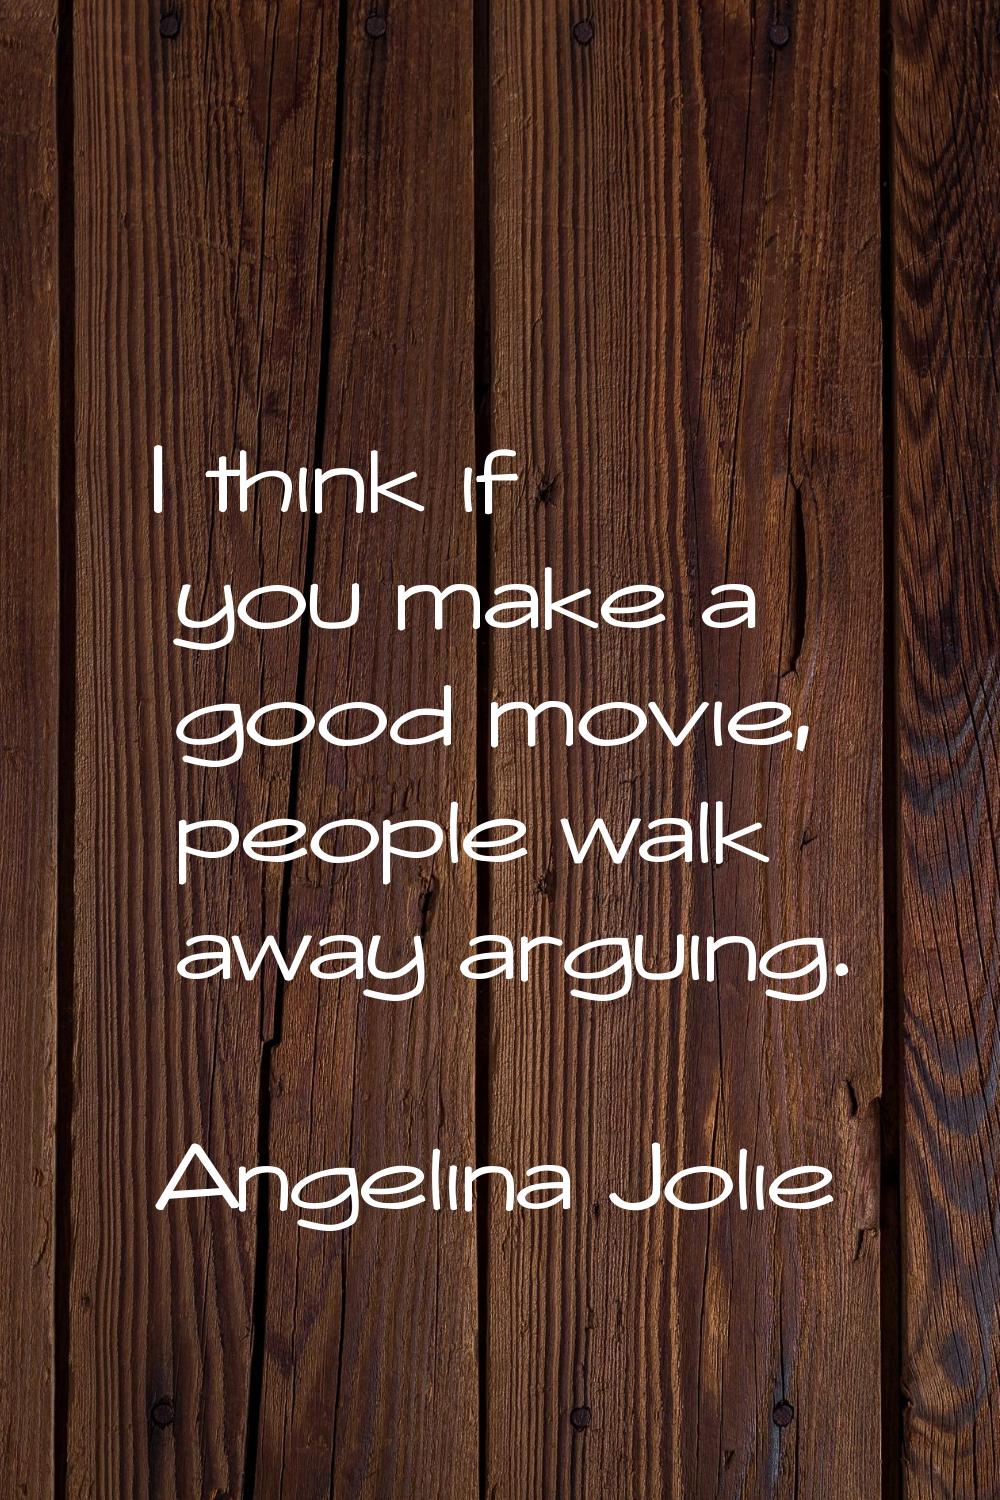 I think if you make a good movie, people walk away arguing.